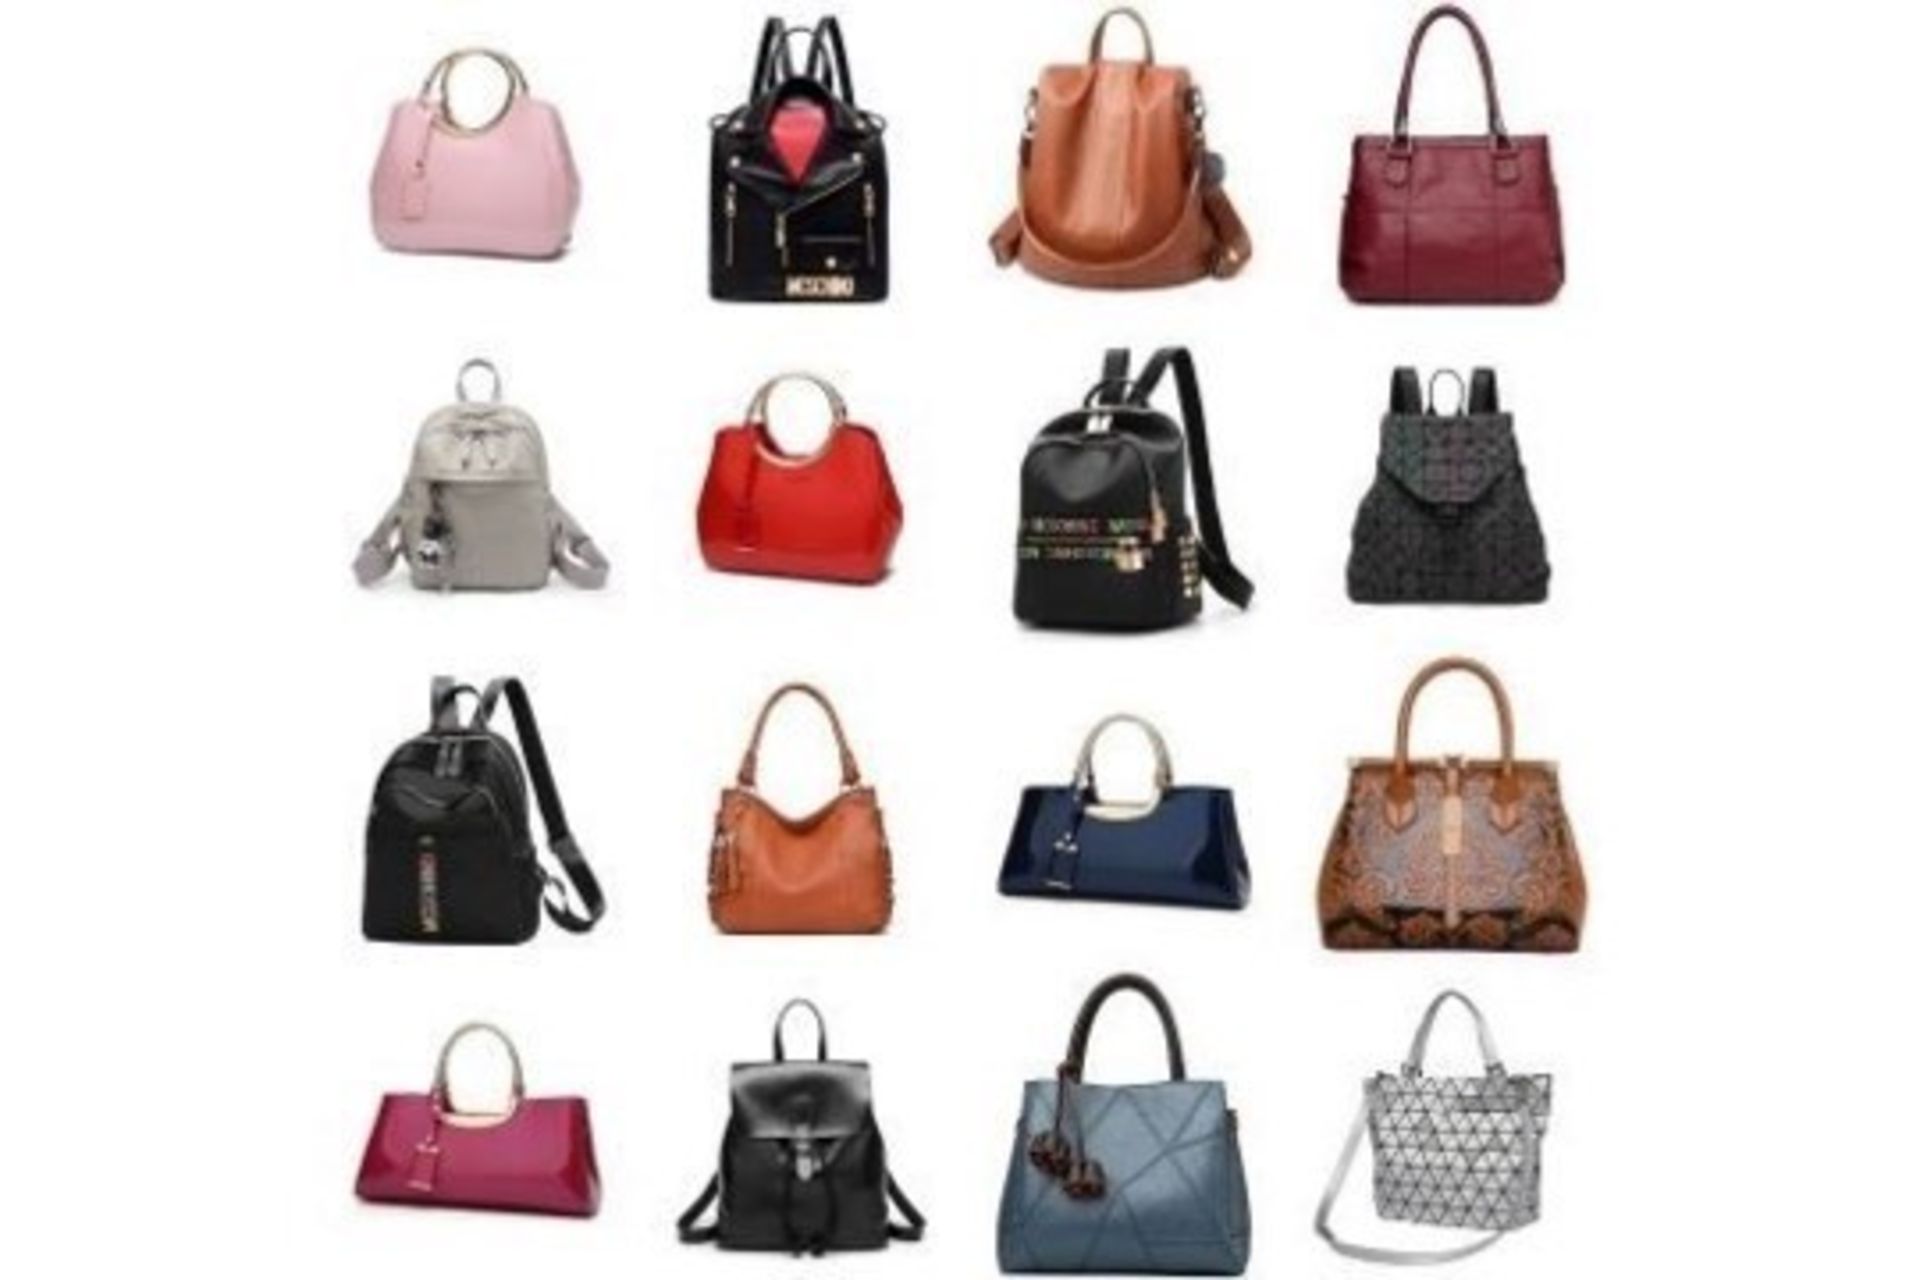 Lot to Contain 10 Assorted Brand New Women's Coolives Designer Handbags RRP £49.99 - £54.99